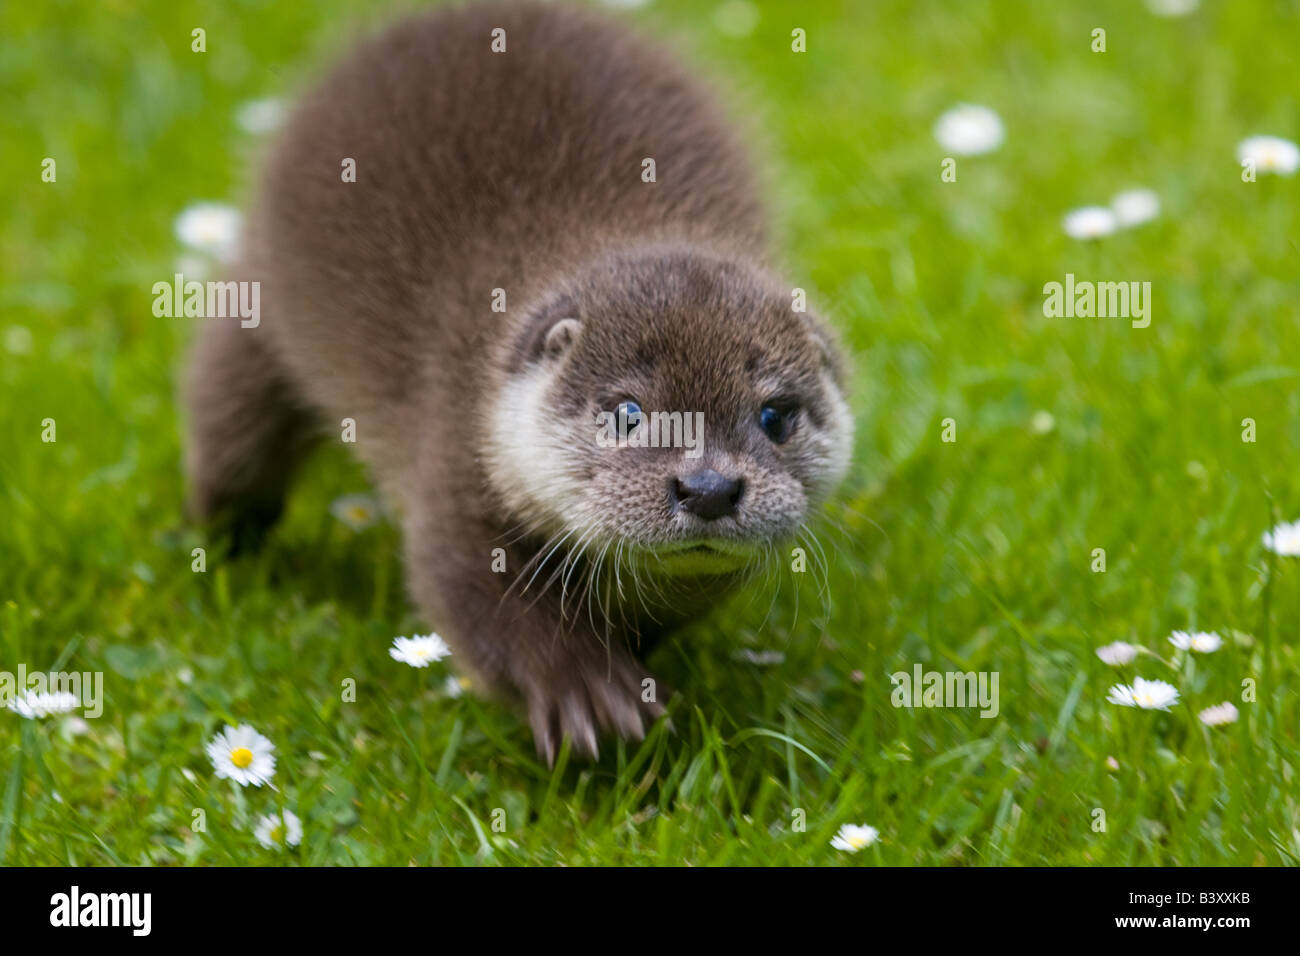 Close up of baby otter cub walking on grass with daisies. Stock Photo